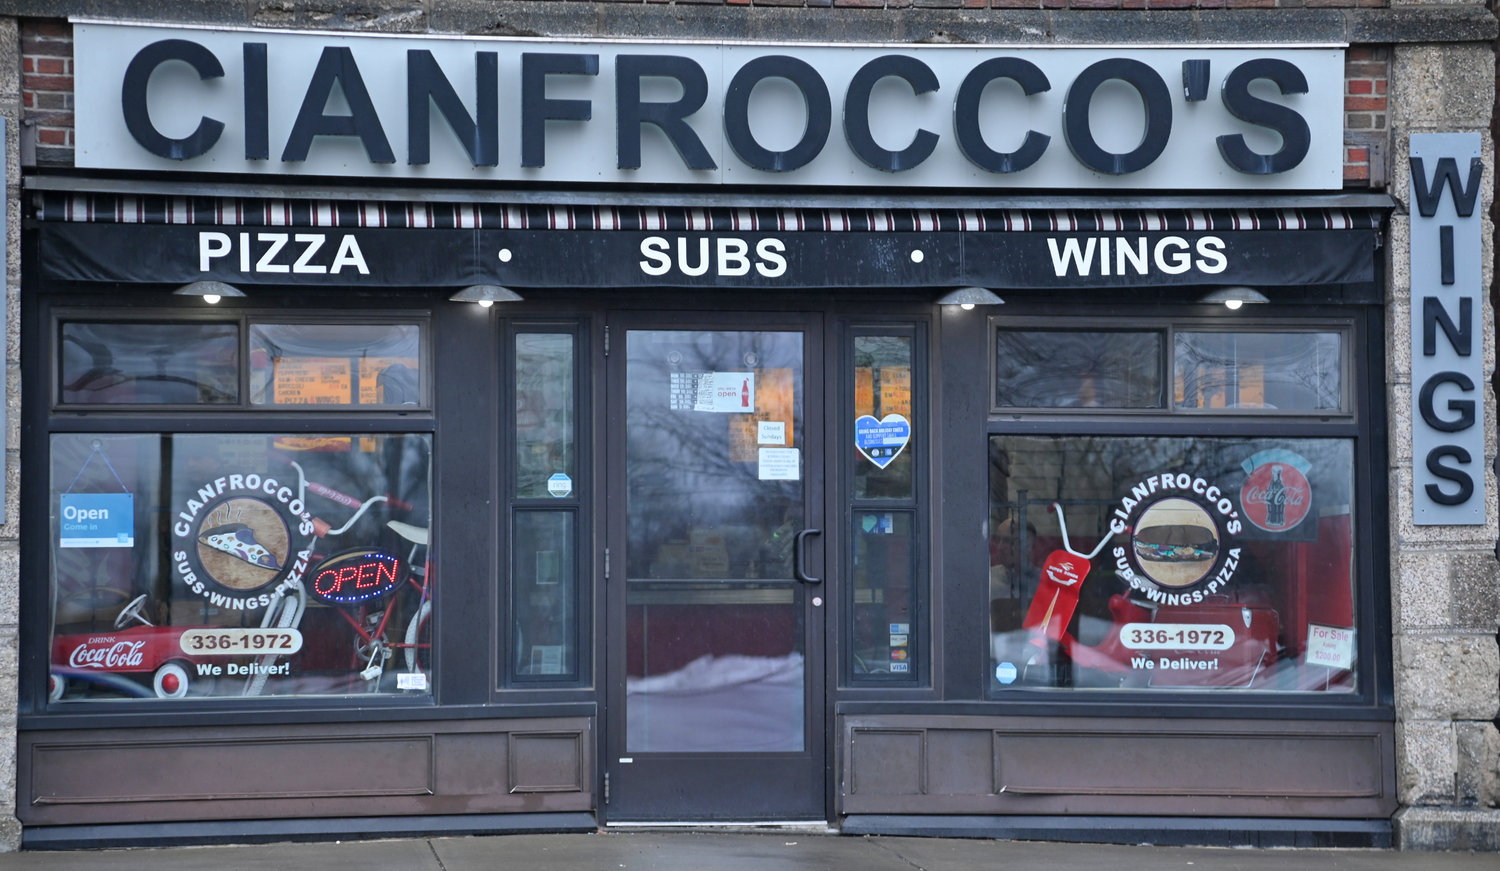 Cianfrocco’s Pizza, Subs &amp; Wings on East Dominick Street in Rome celebrates 50 years in business in February.